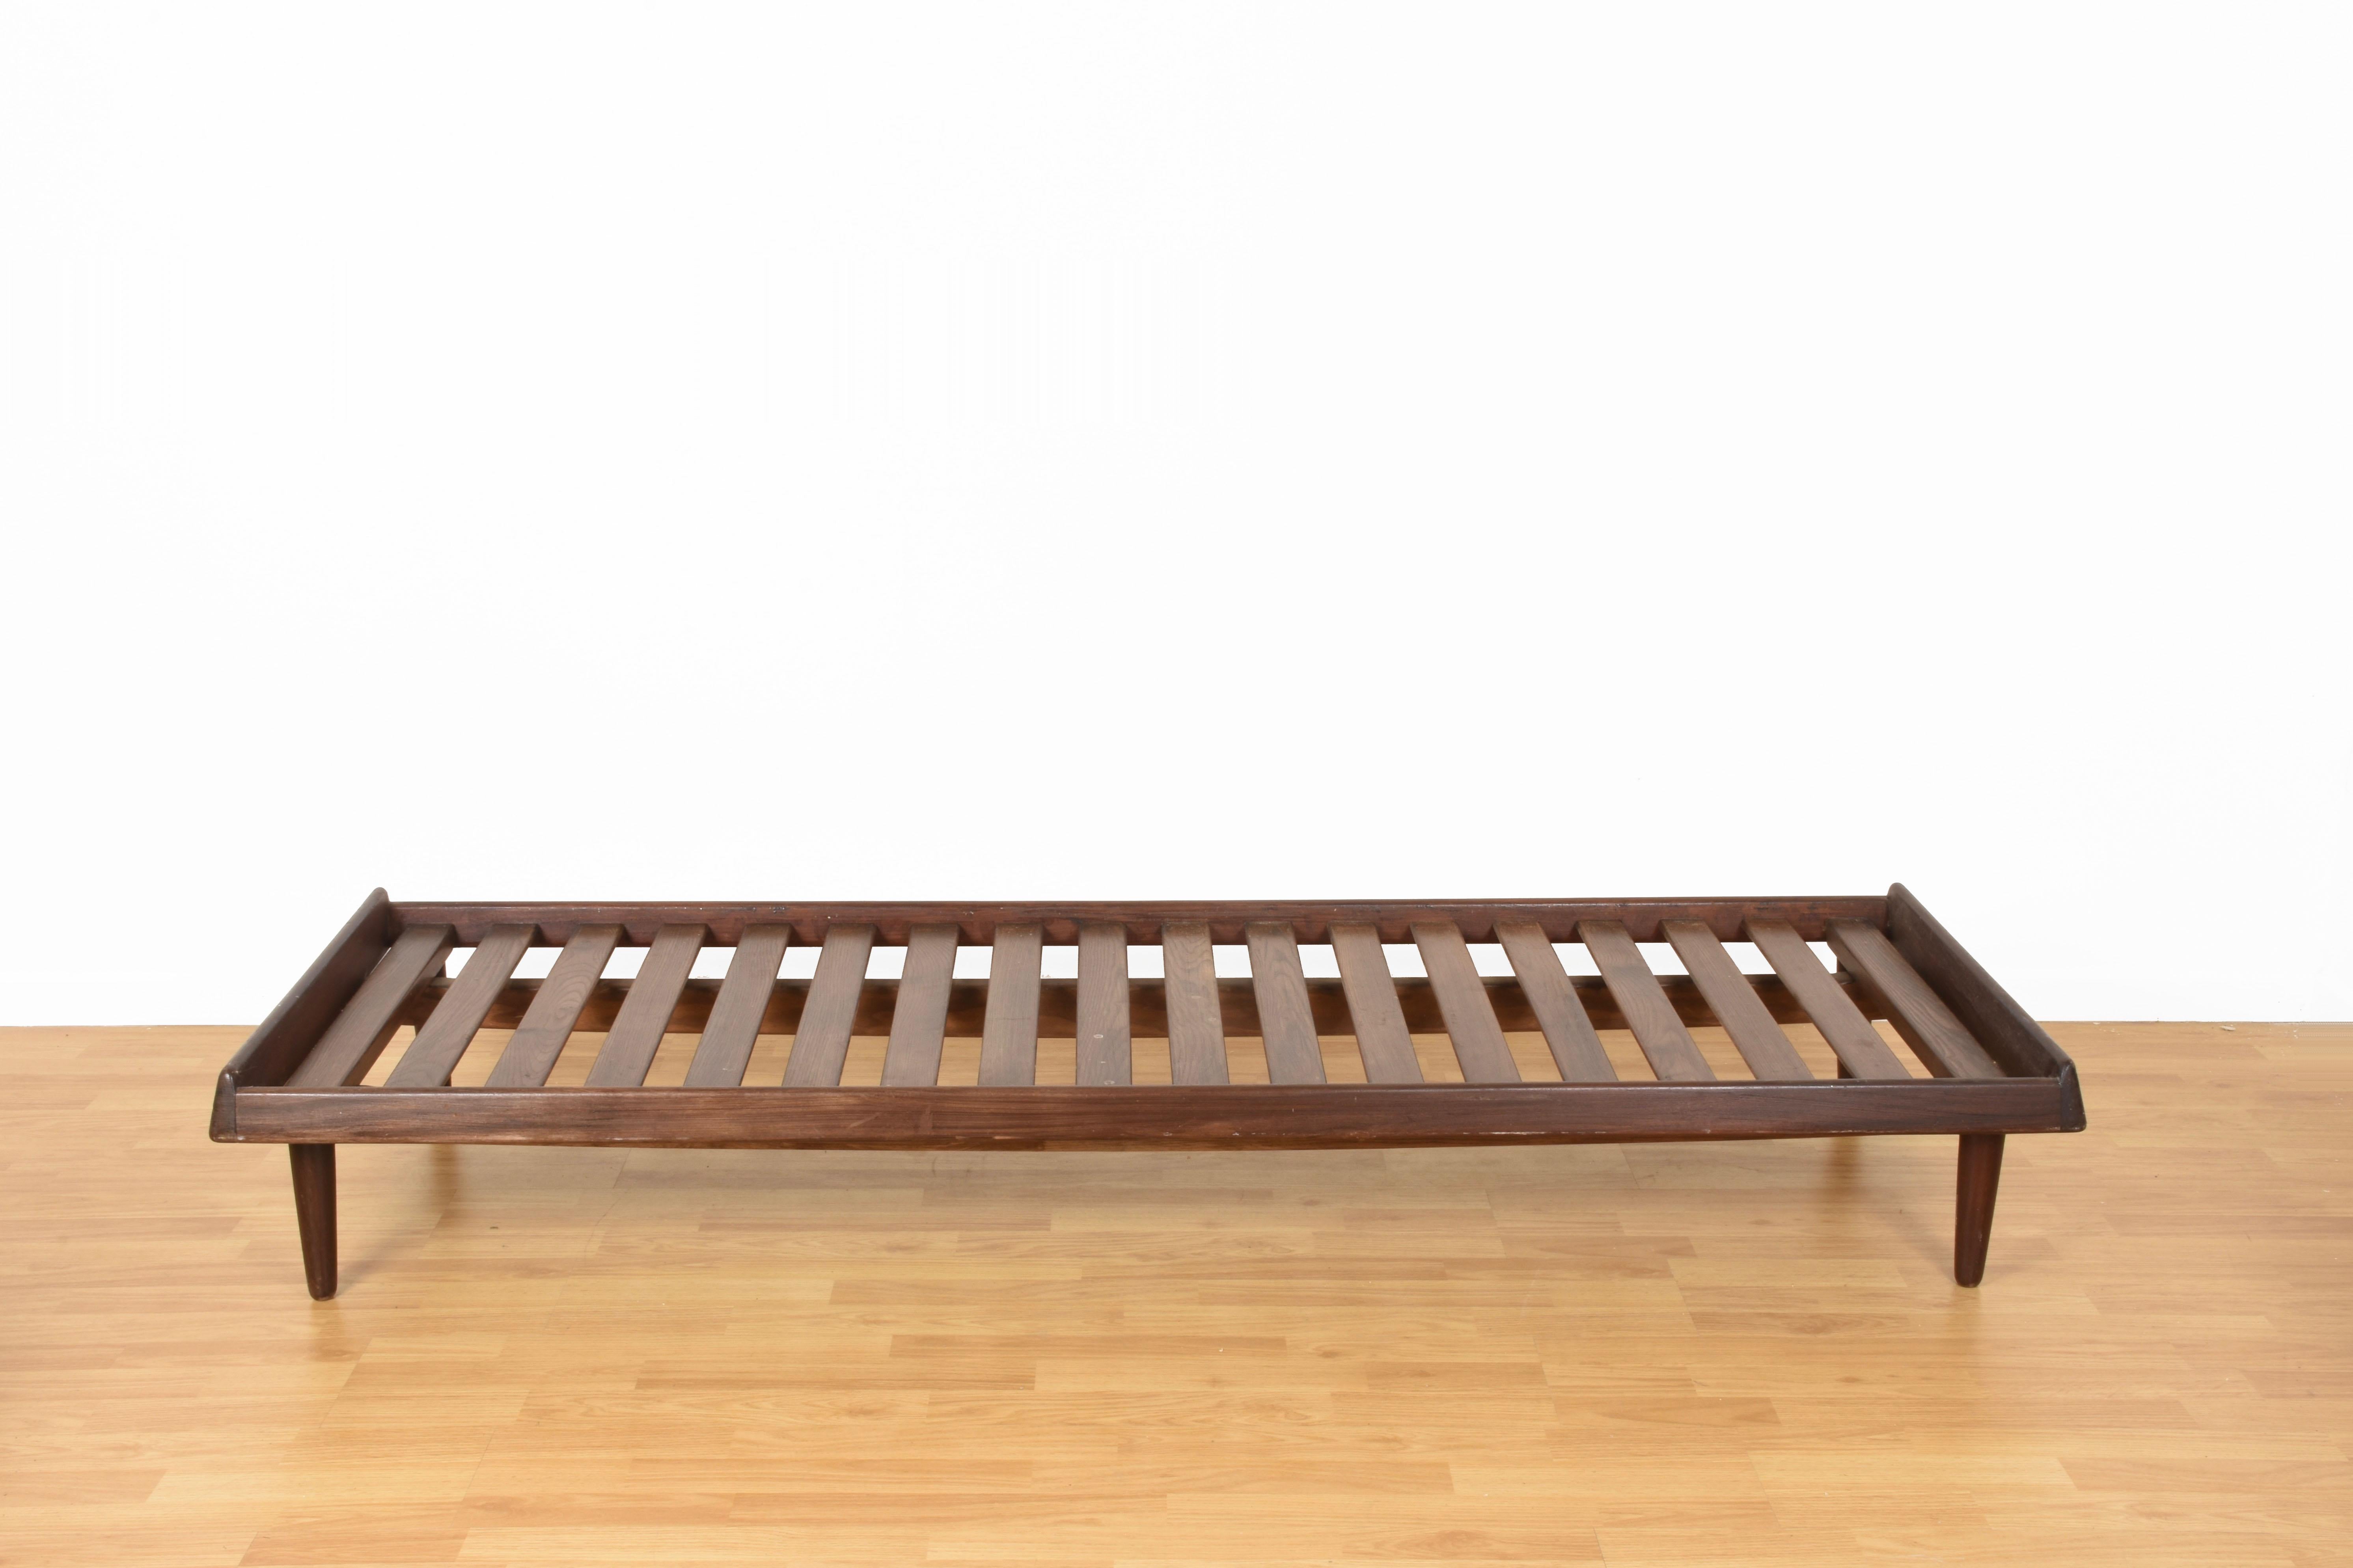 Fantastic sofa model TV161 designed by Hans Olsen and produced by Bramin. This daybed was produced in Denmark in 1957. 

A beautiful and robust daybed made of solid teak, it can be used as a sofa or bench. 

Its straight iconic Scandinavian